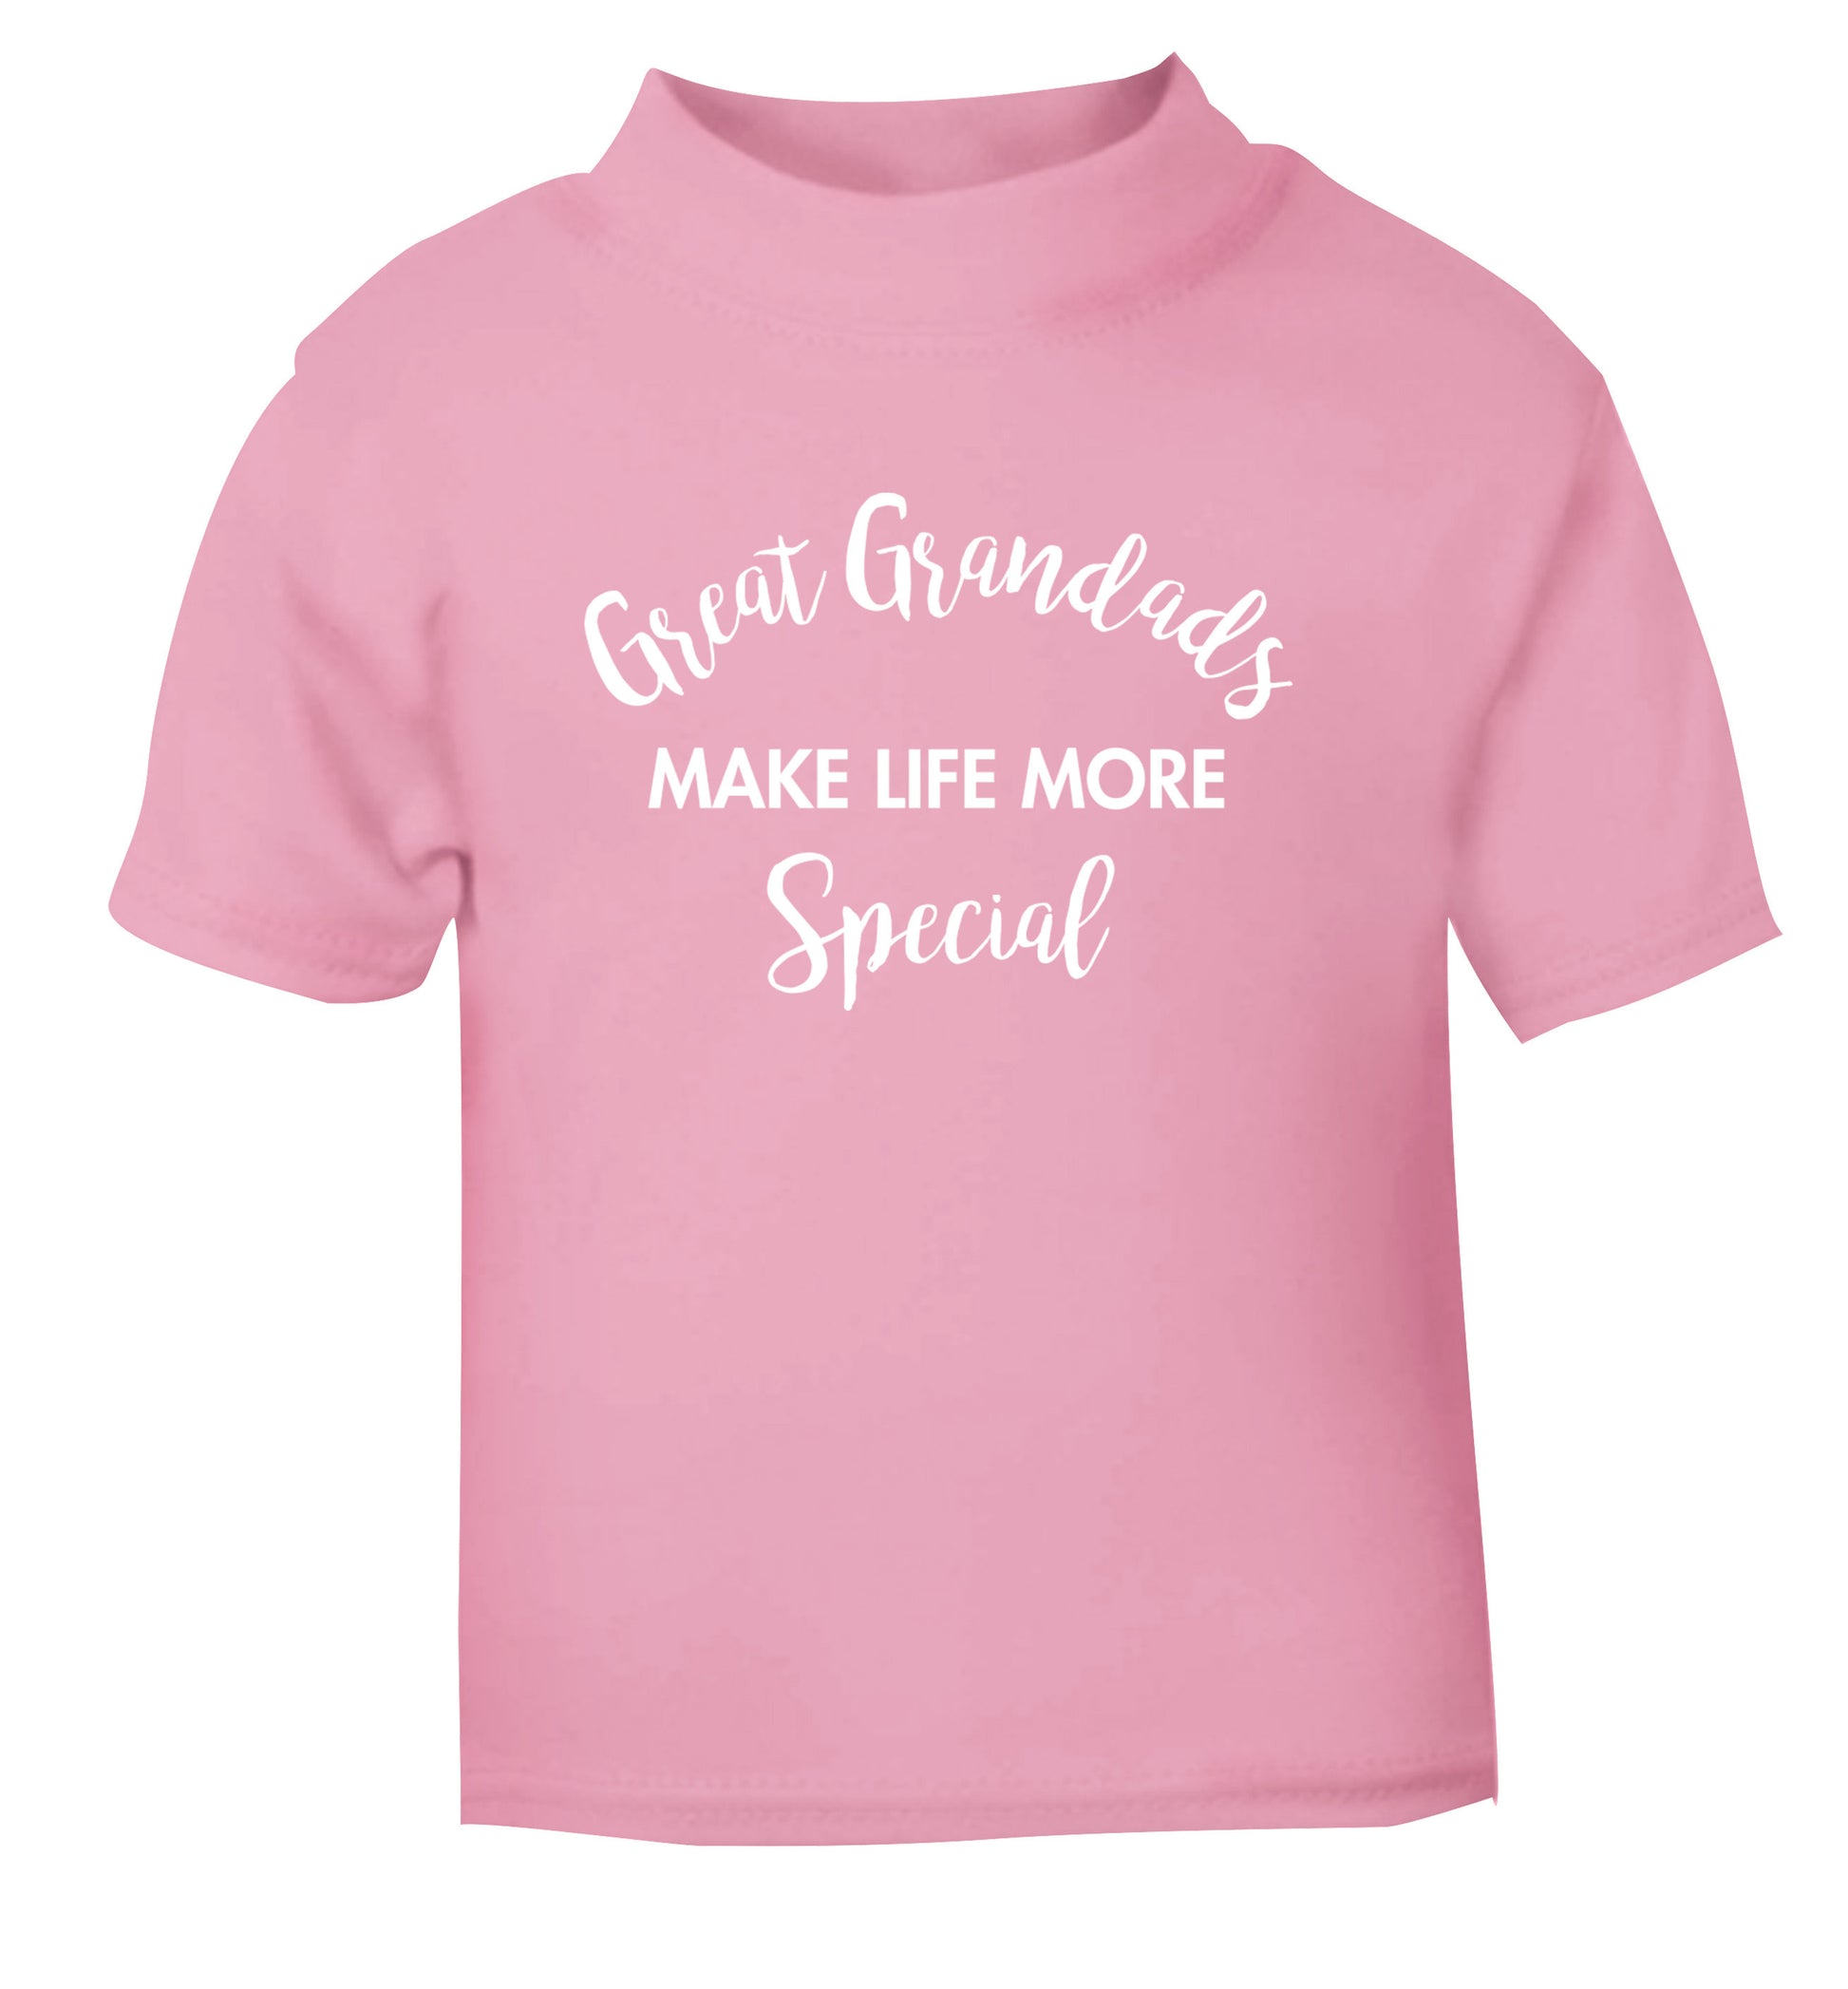 Great Grandads make life more special light pink Baby Toddler Tshirt 2 Years